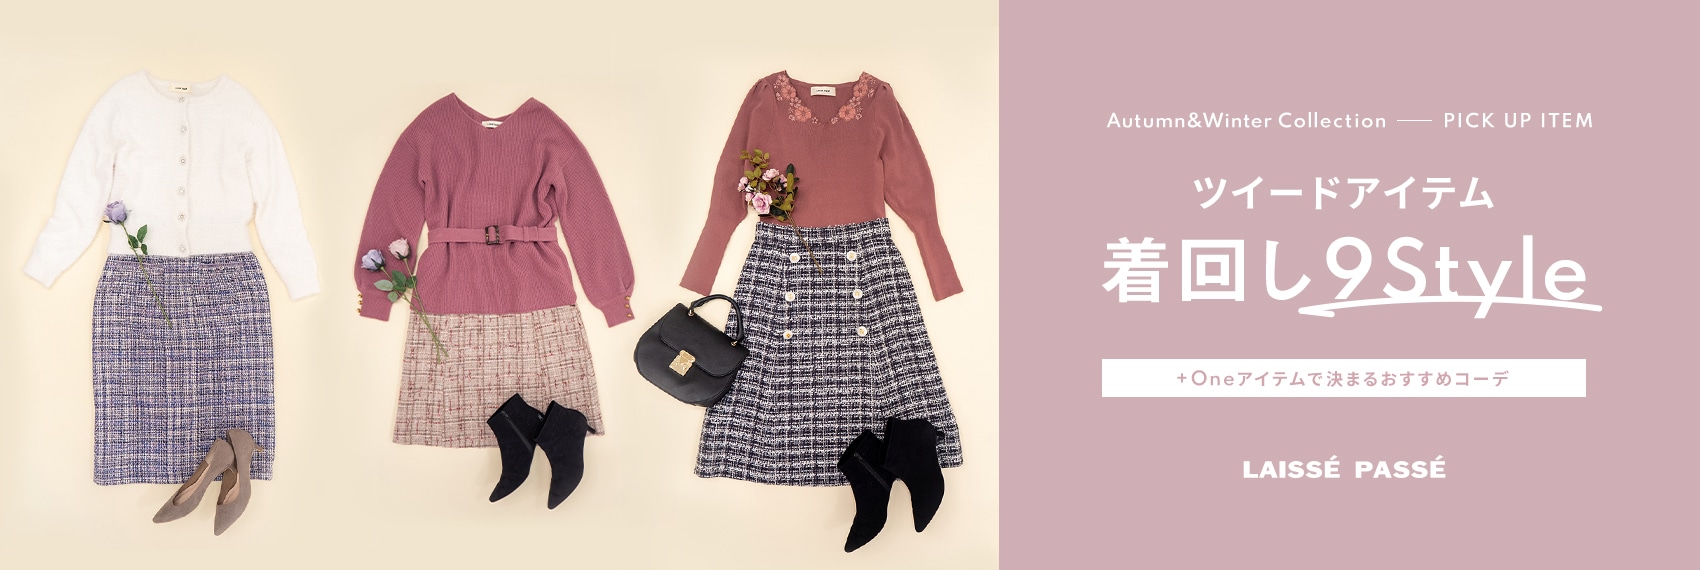 Autumn＆Winter Collection ツイードアイテム着回し9Style